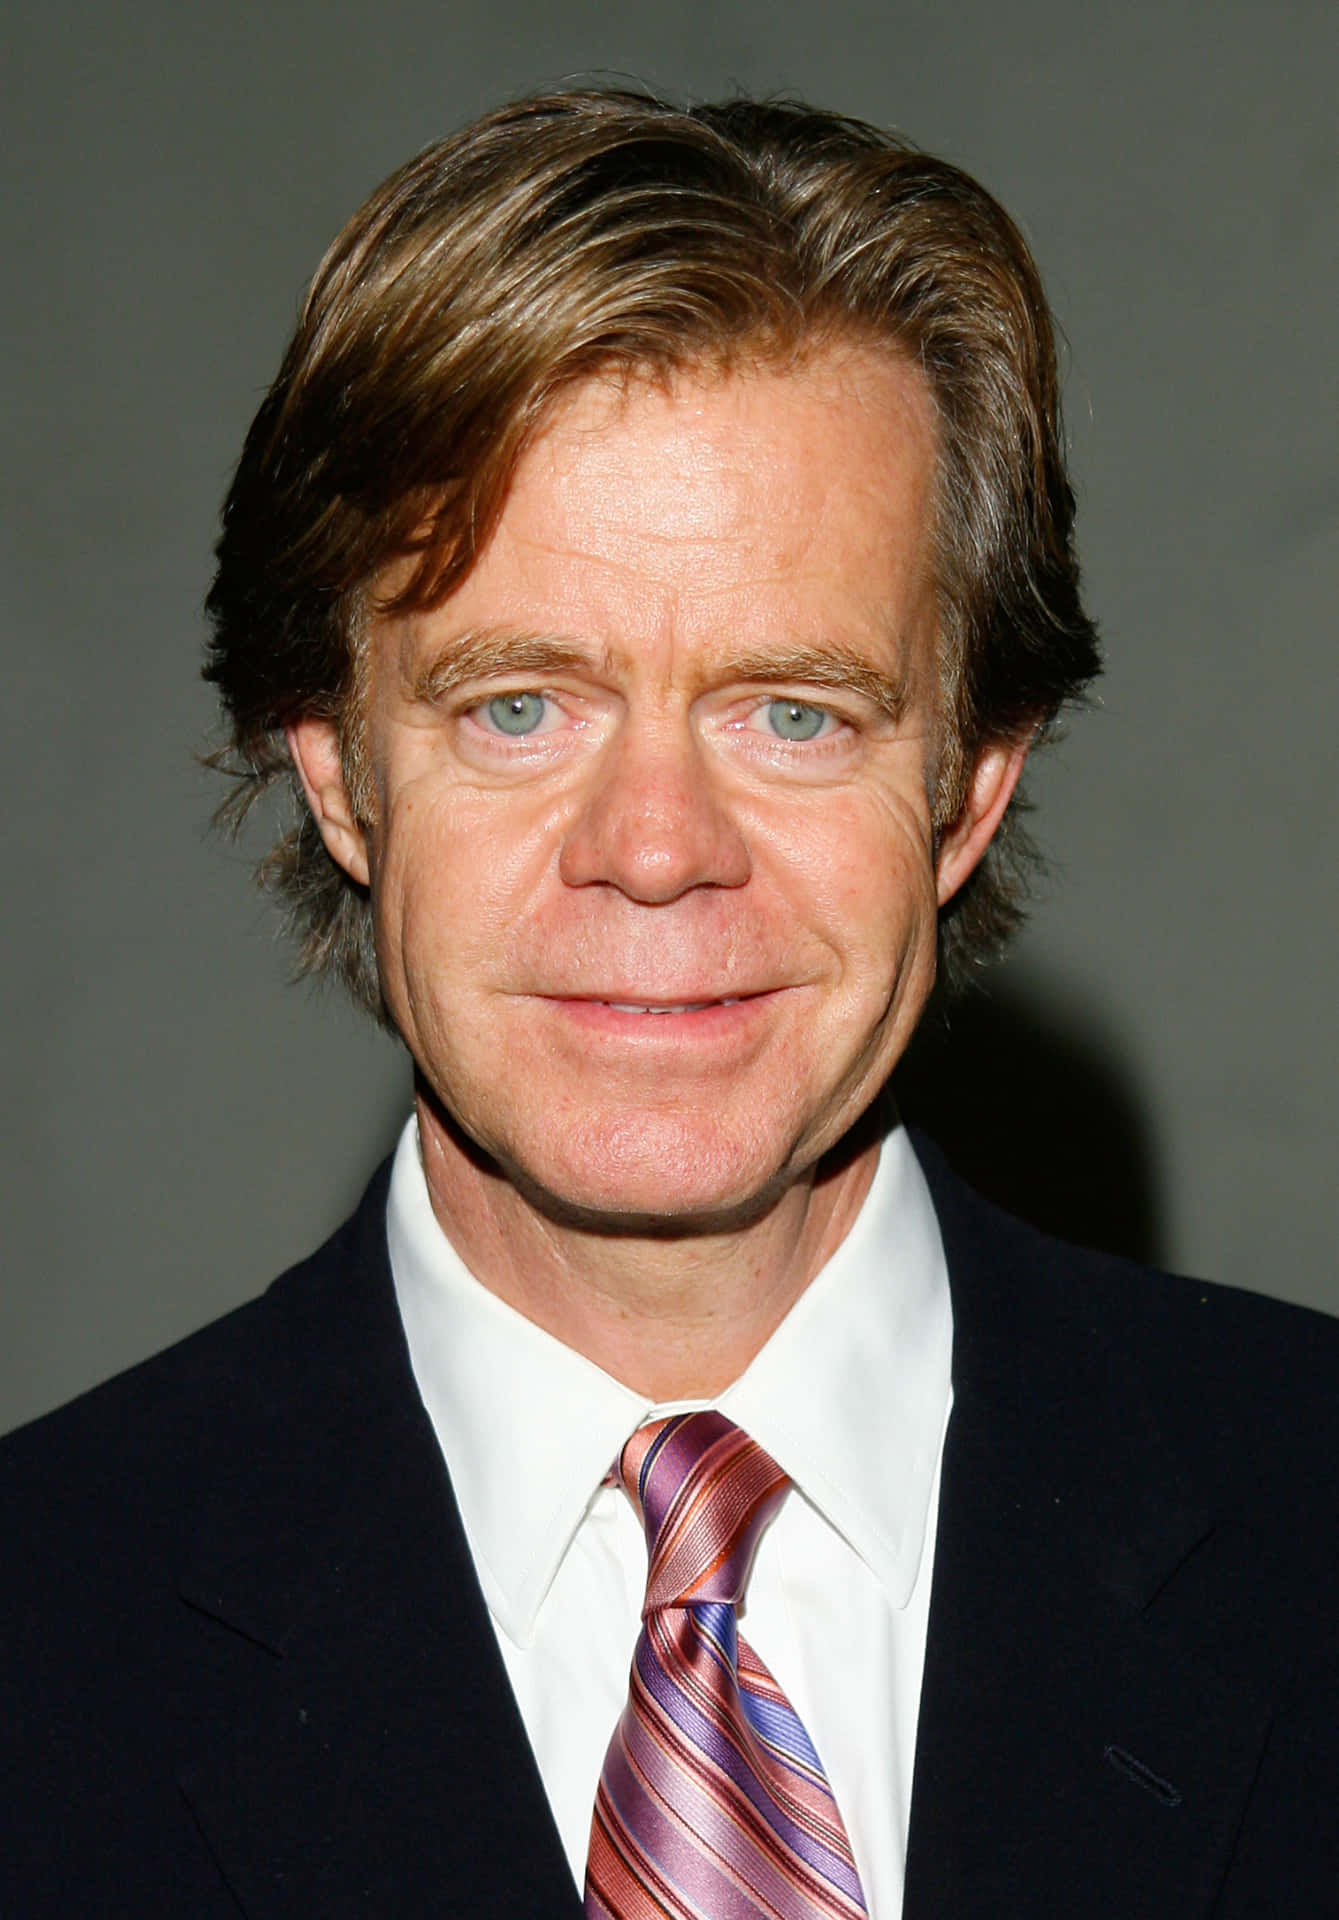 Emmy-nominated actor William H. Macy poses for a portrait. Wallpaper